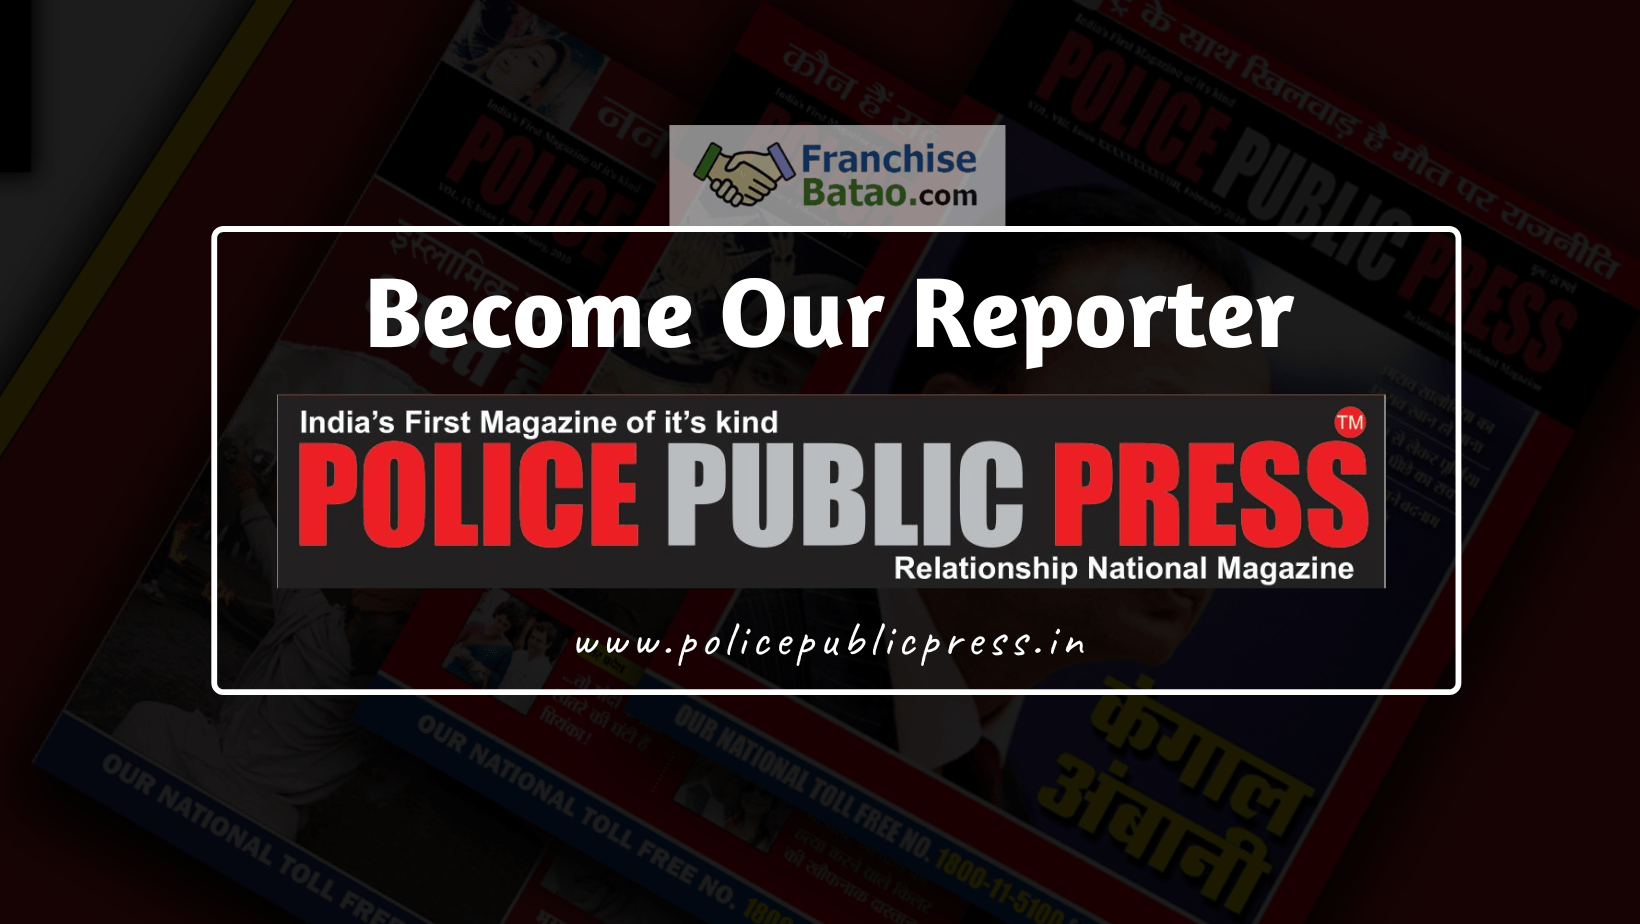 Become a reporter with police public press